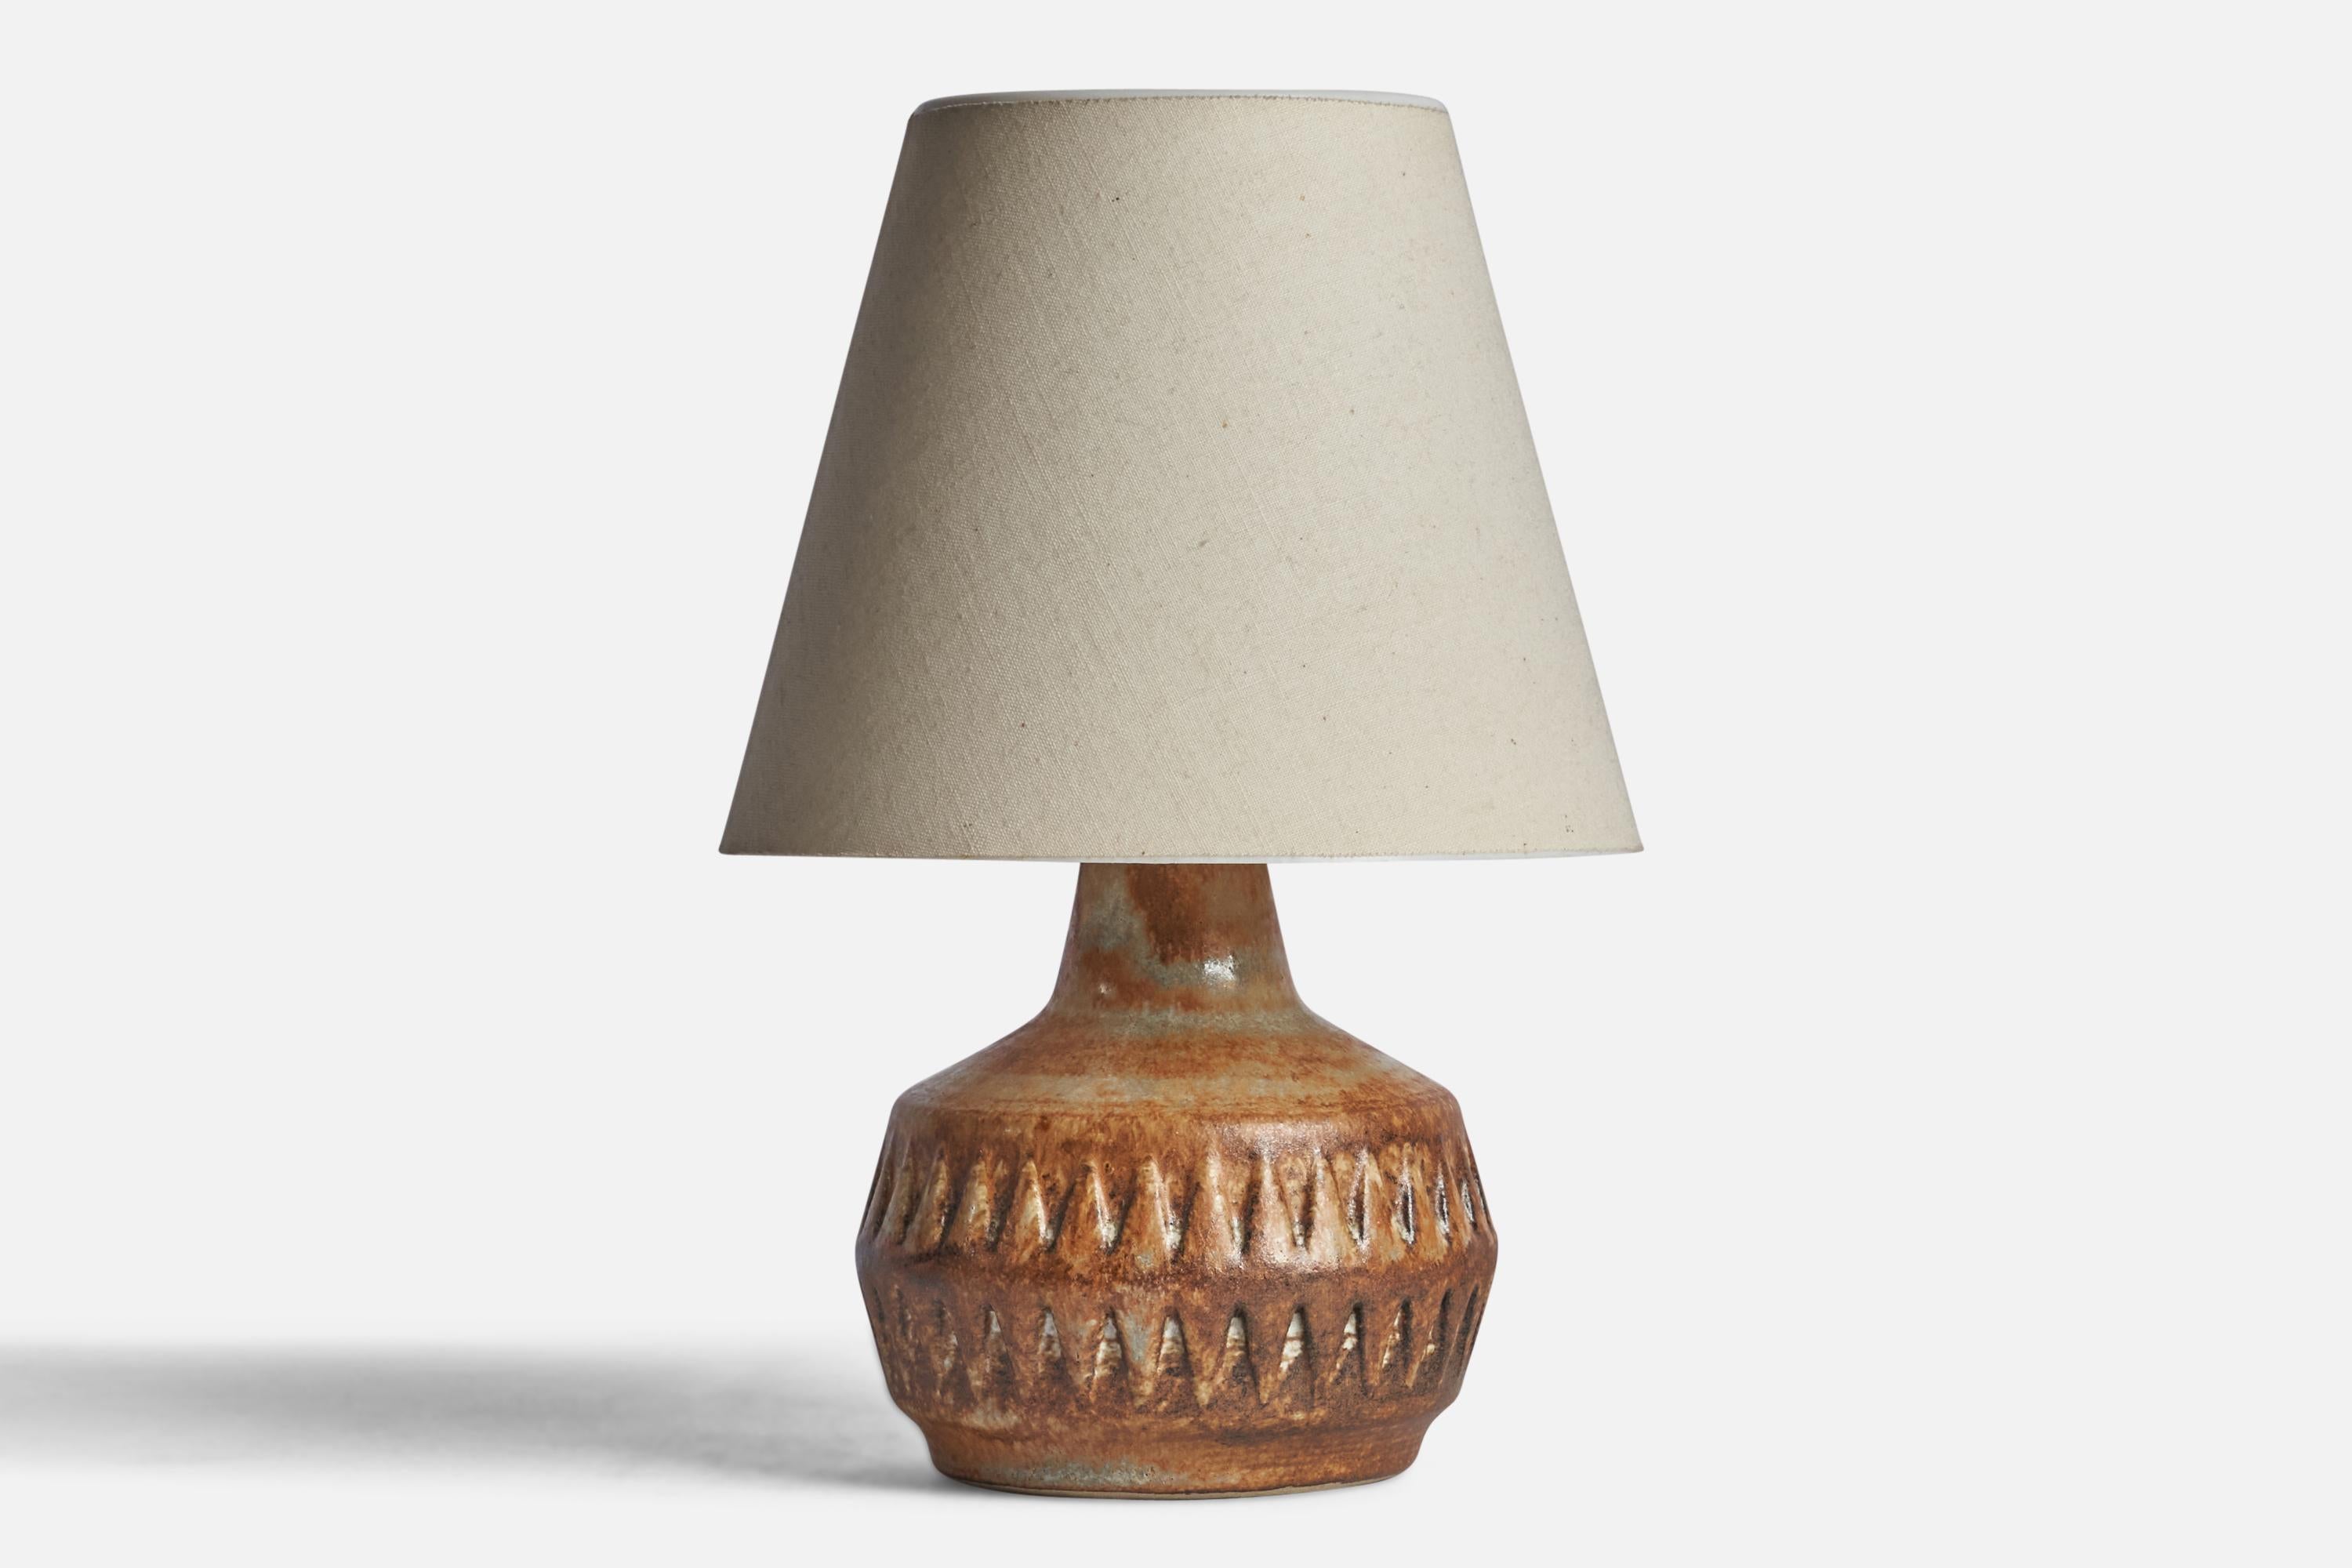 A brown-glazed stoneware table lamp designed and produced in Sweden, 1960s.

Dimensions of Lamp (inches): 7” H x 4.75” Diameter
Dimensions of Shade (inches): 3.5” Top Diameter x 6.4” Bottom Diameter x 5.5” H 
Dimensions of Lamp with Shade (inches):